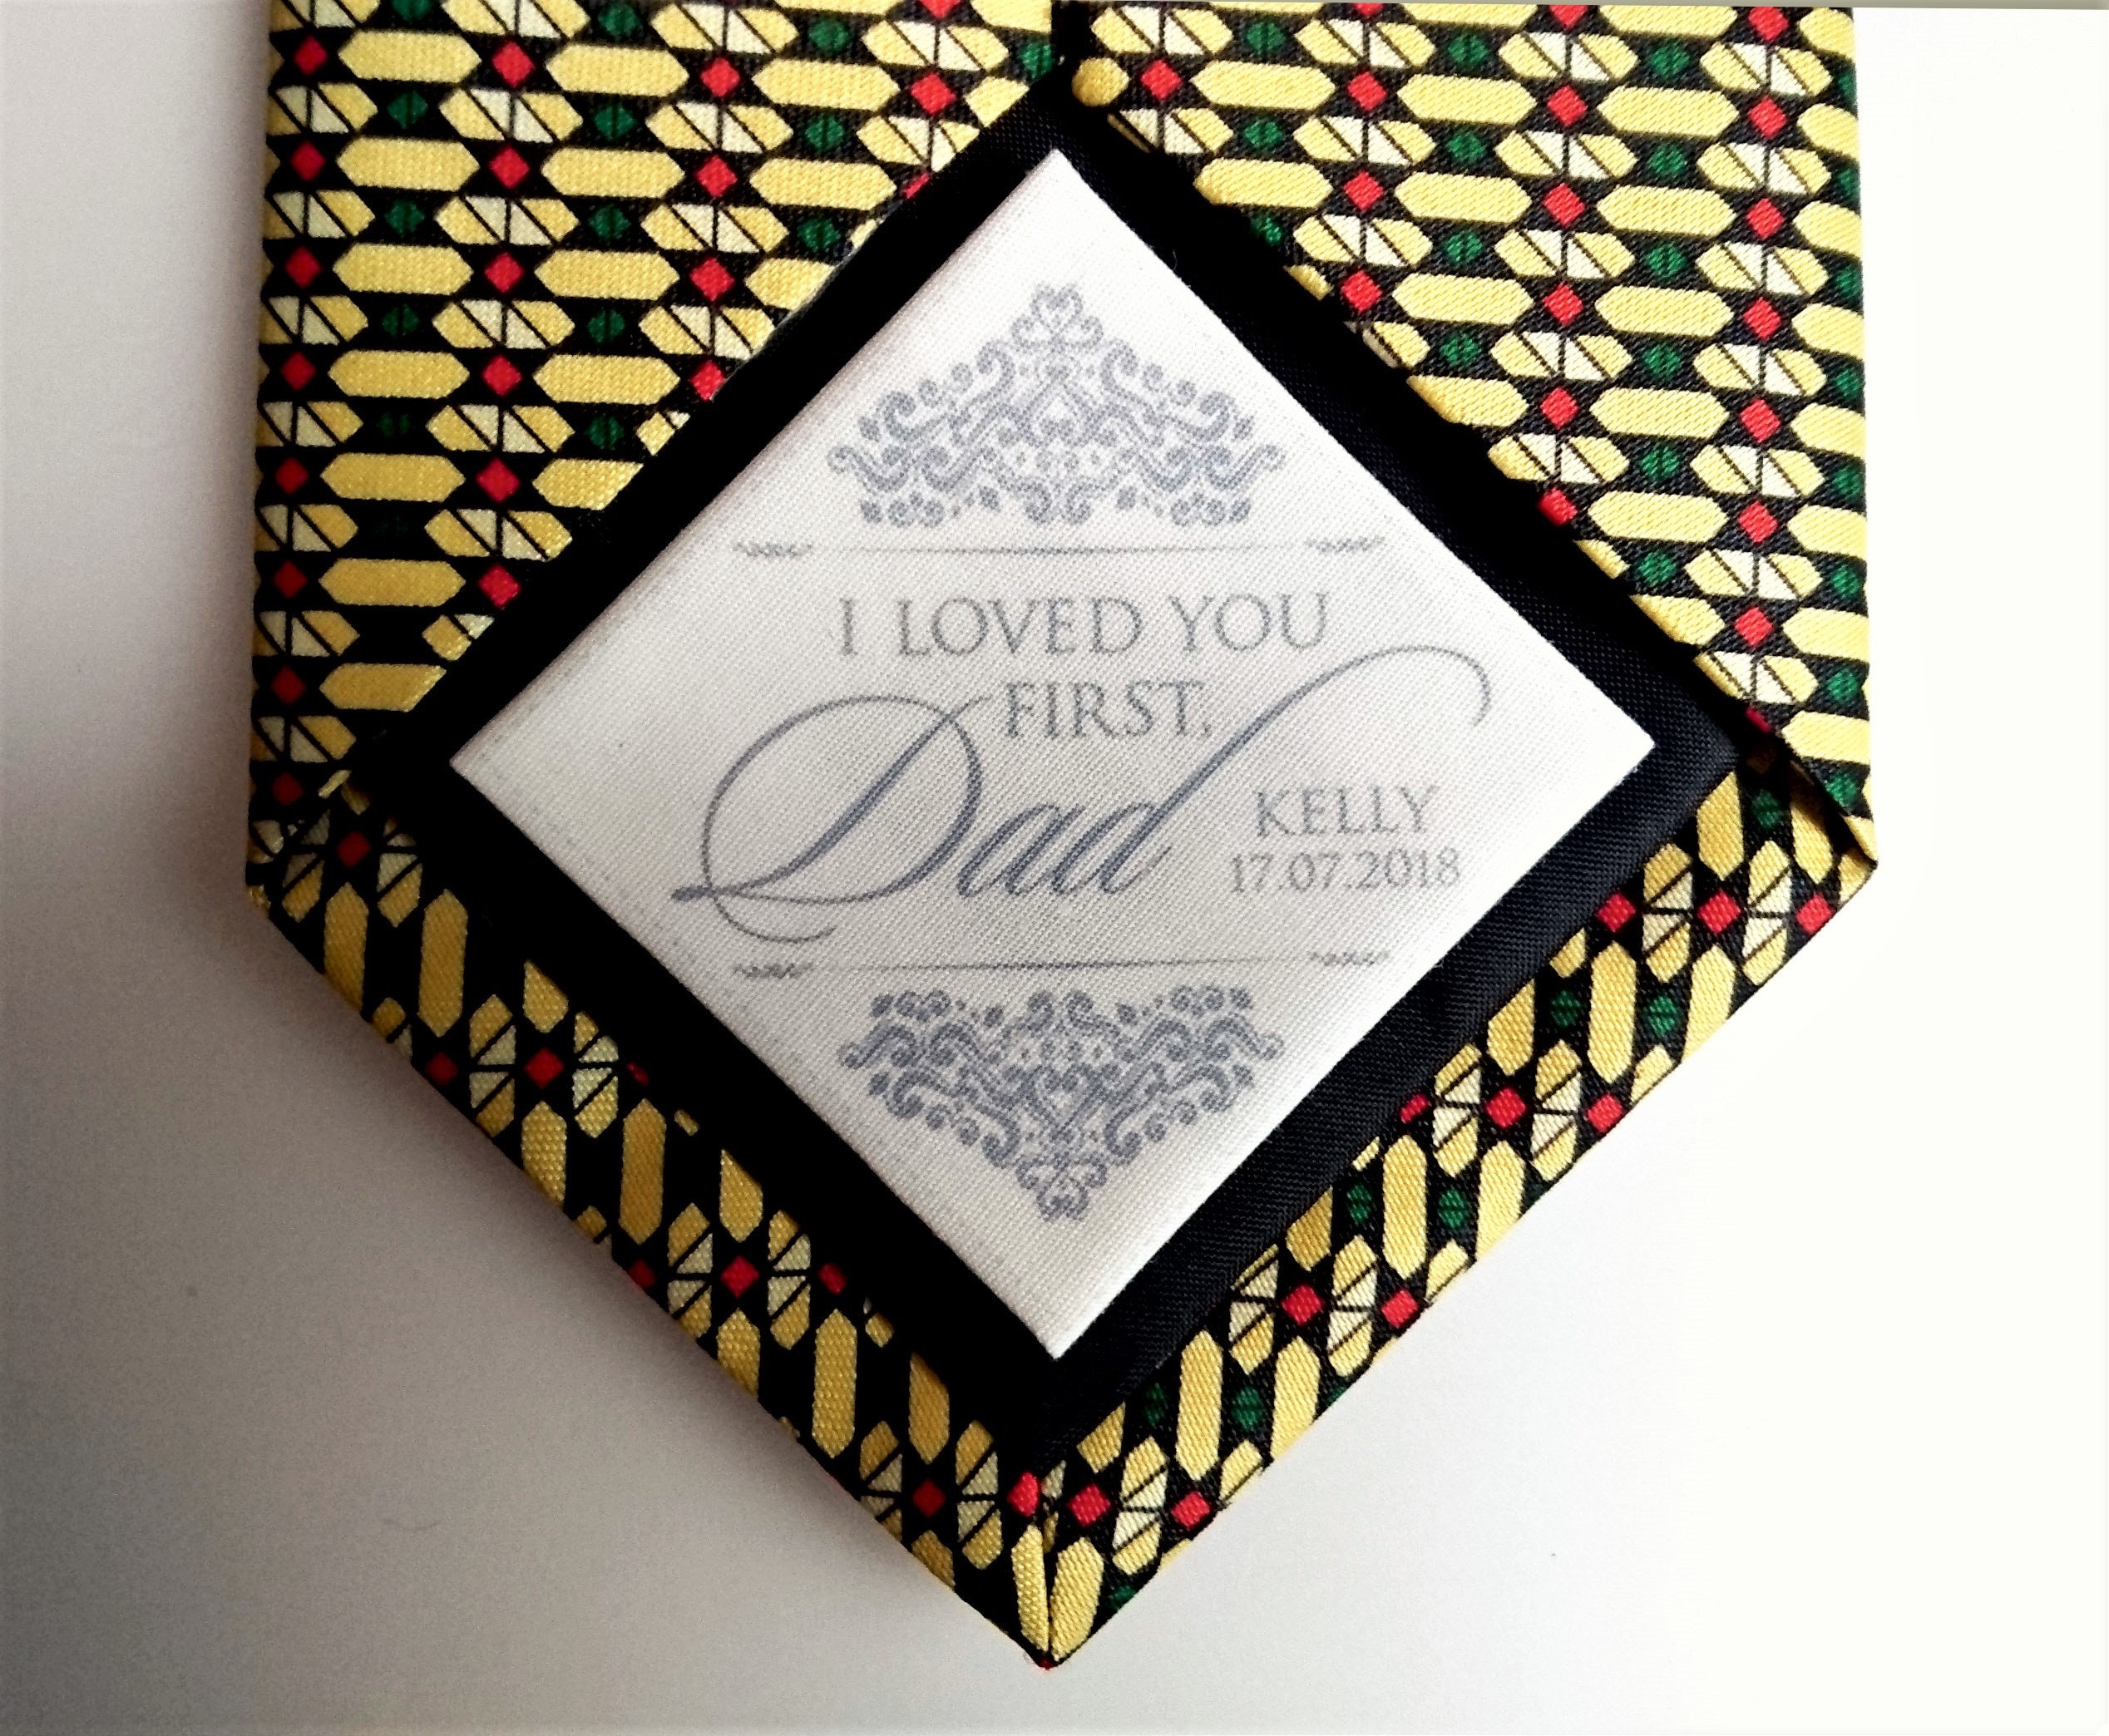 I Loved You First, Dad Personalised Wedding Tie Patch, Father Of The Bride Gift, Keepsake Label, Necktie Patch For Dad On Day